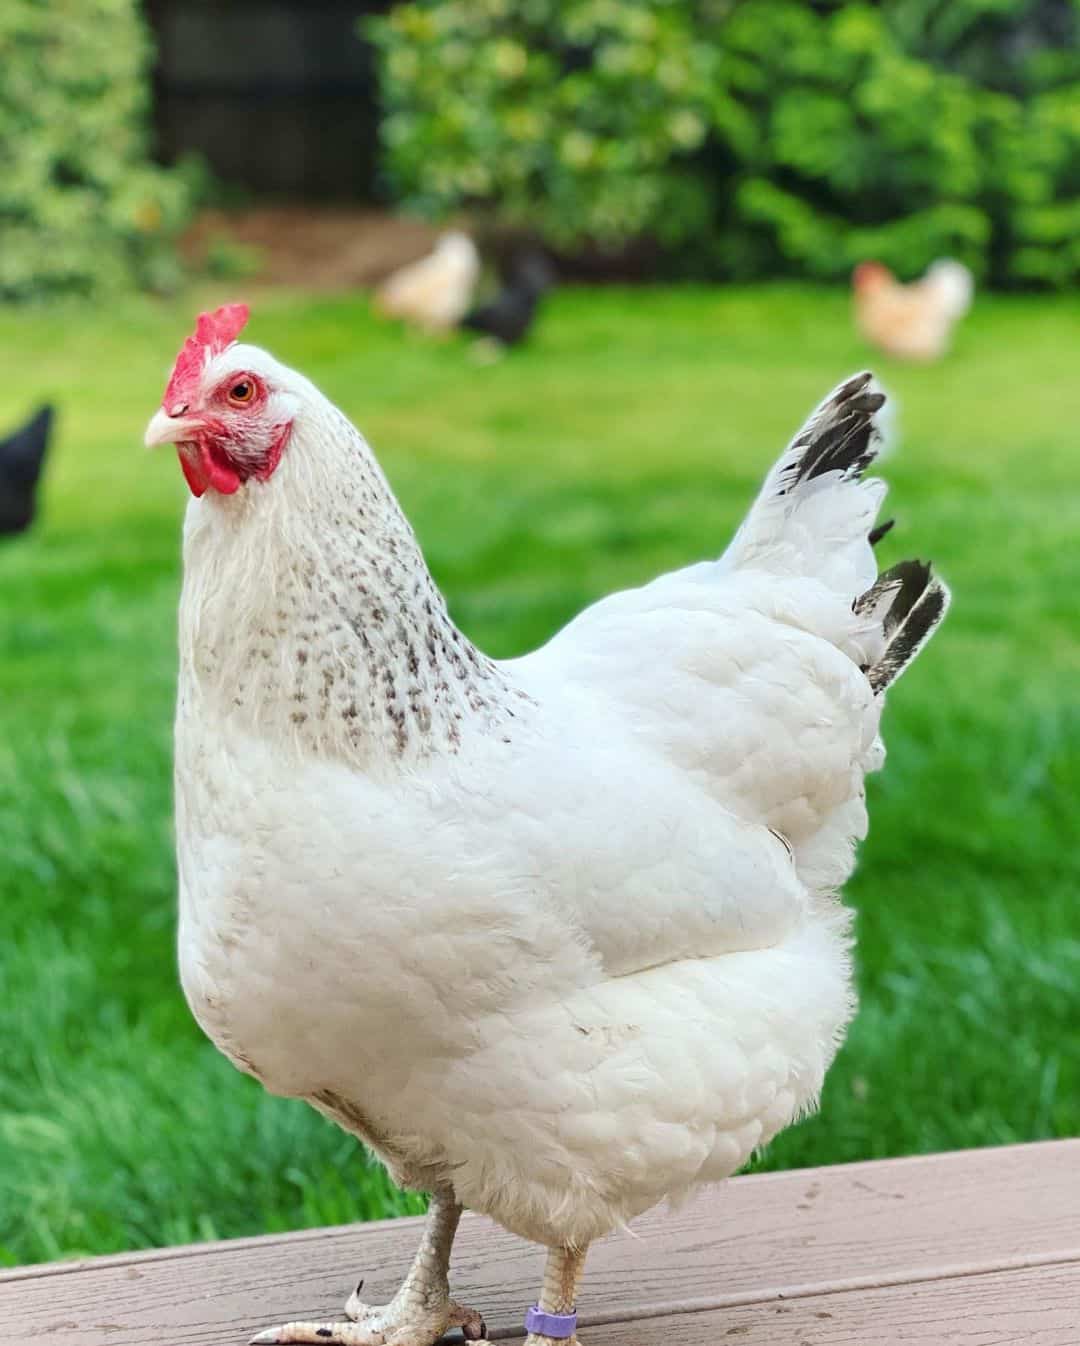 Delaware chickens and their egg-laying abilities